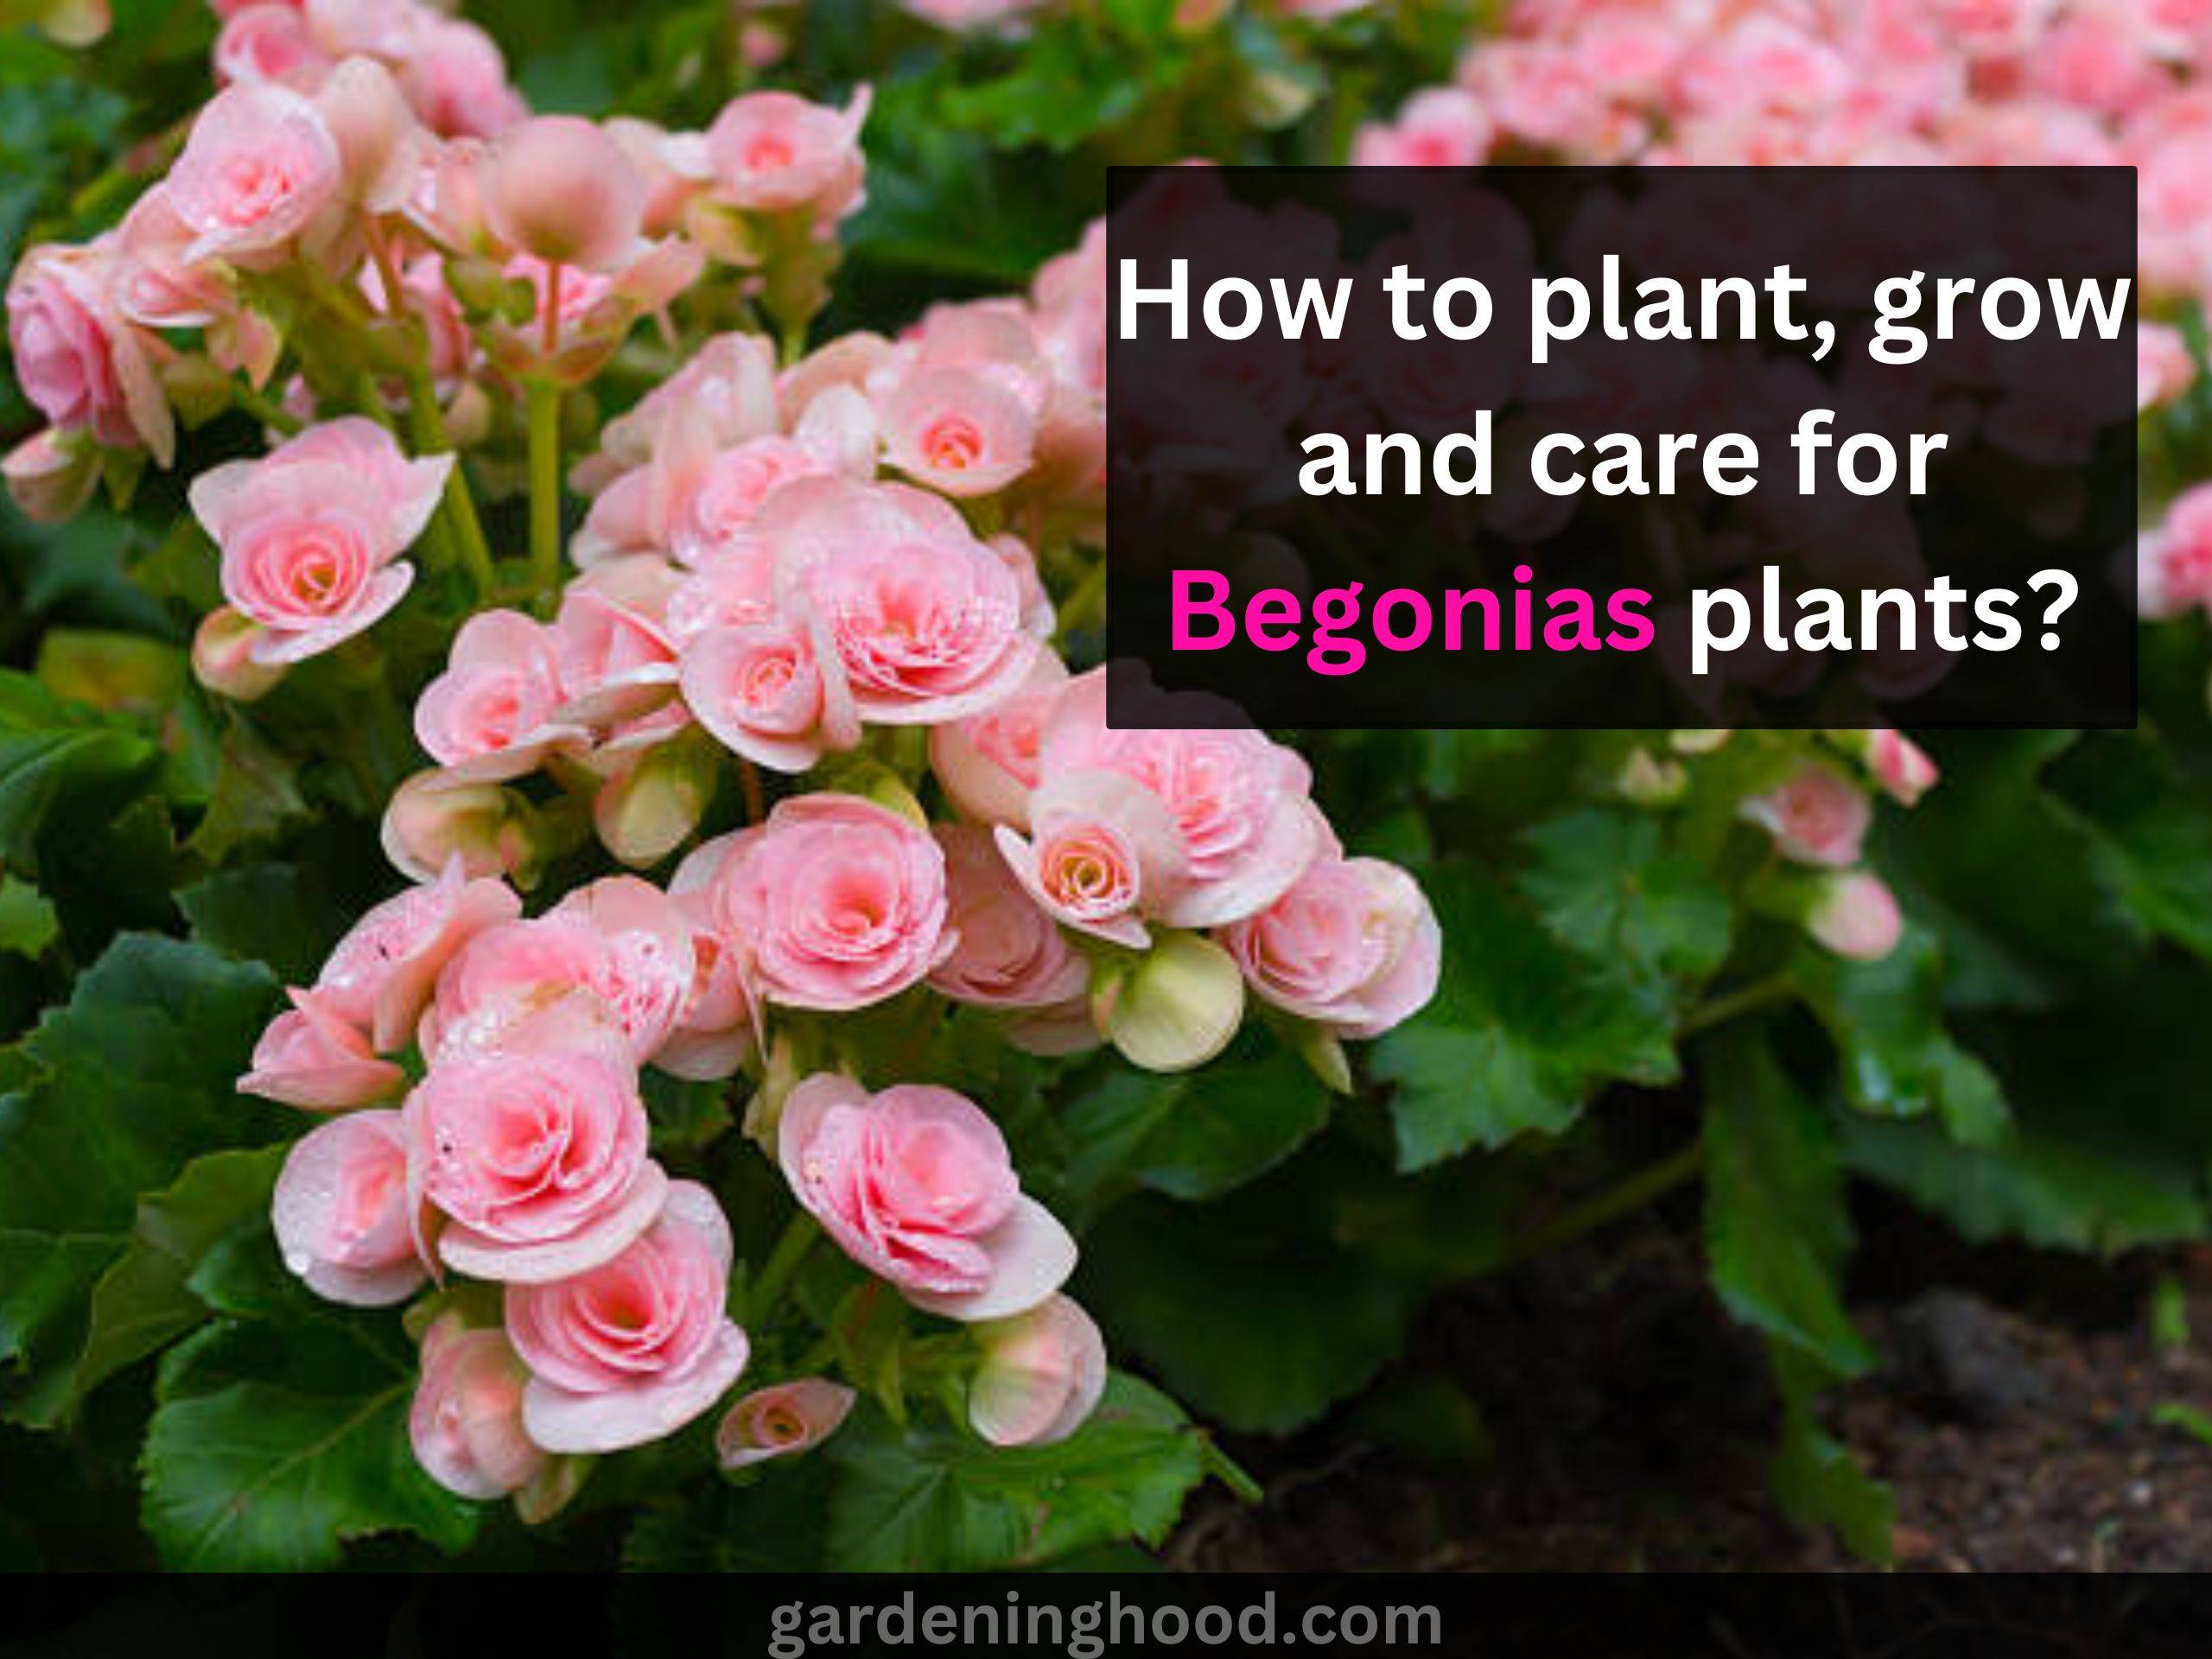 How to plant, grow and care for Begonias plants?